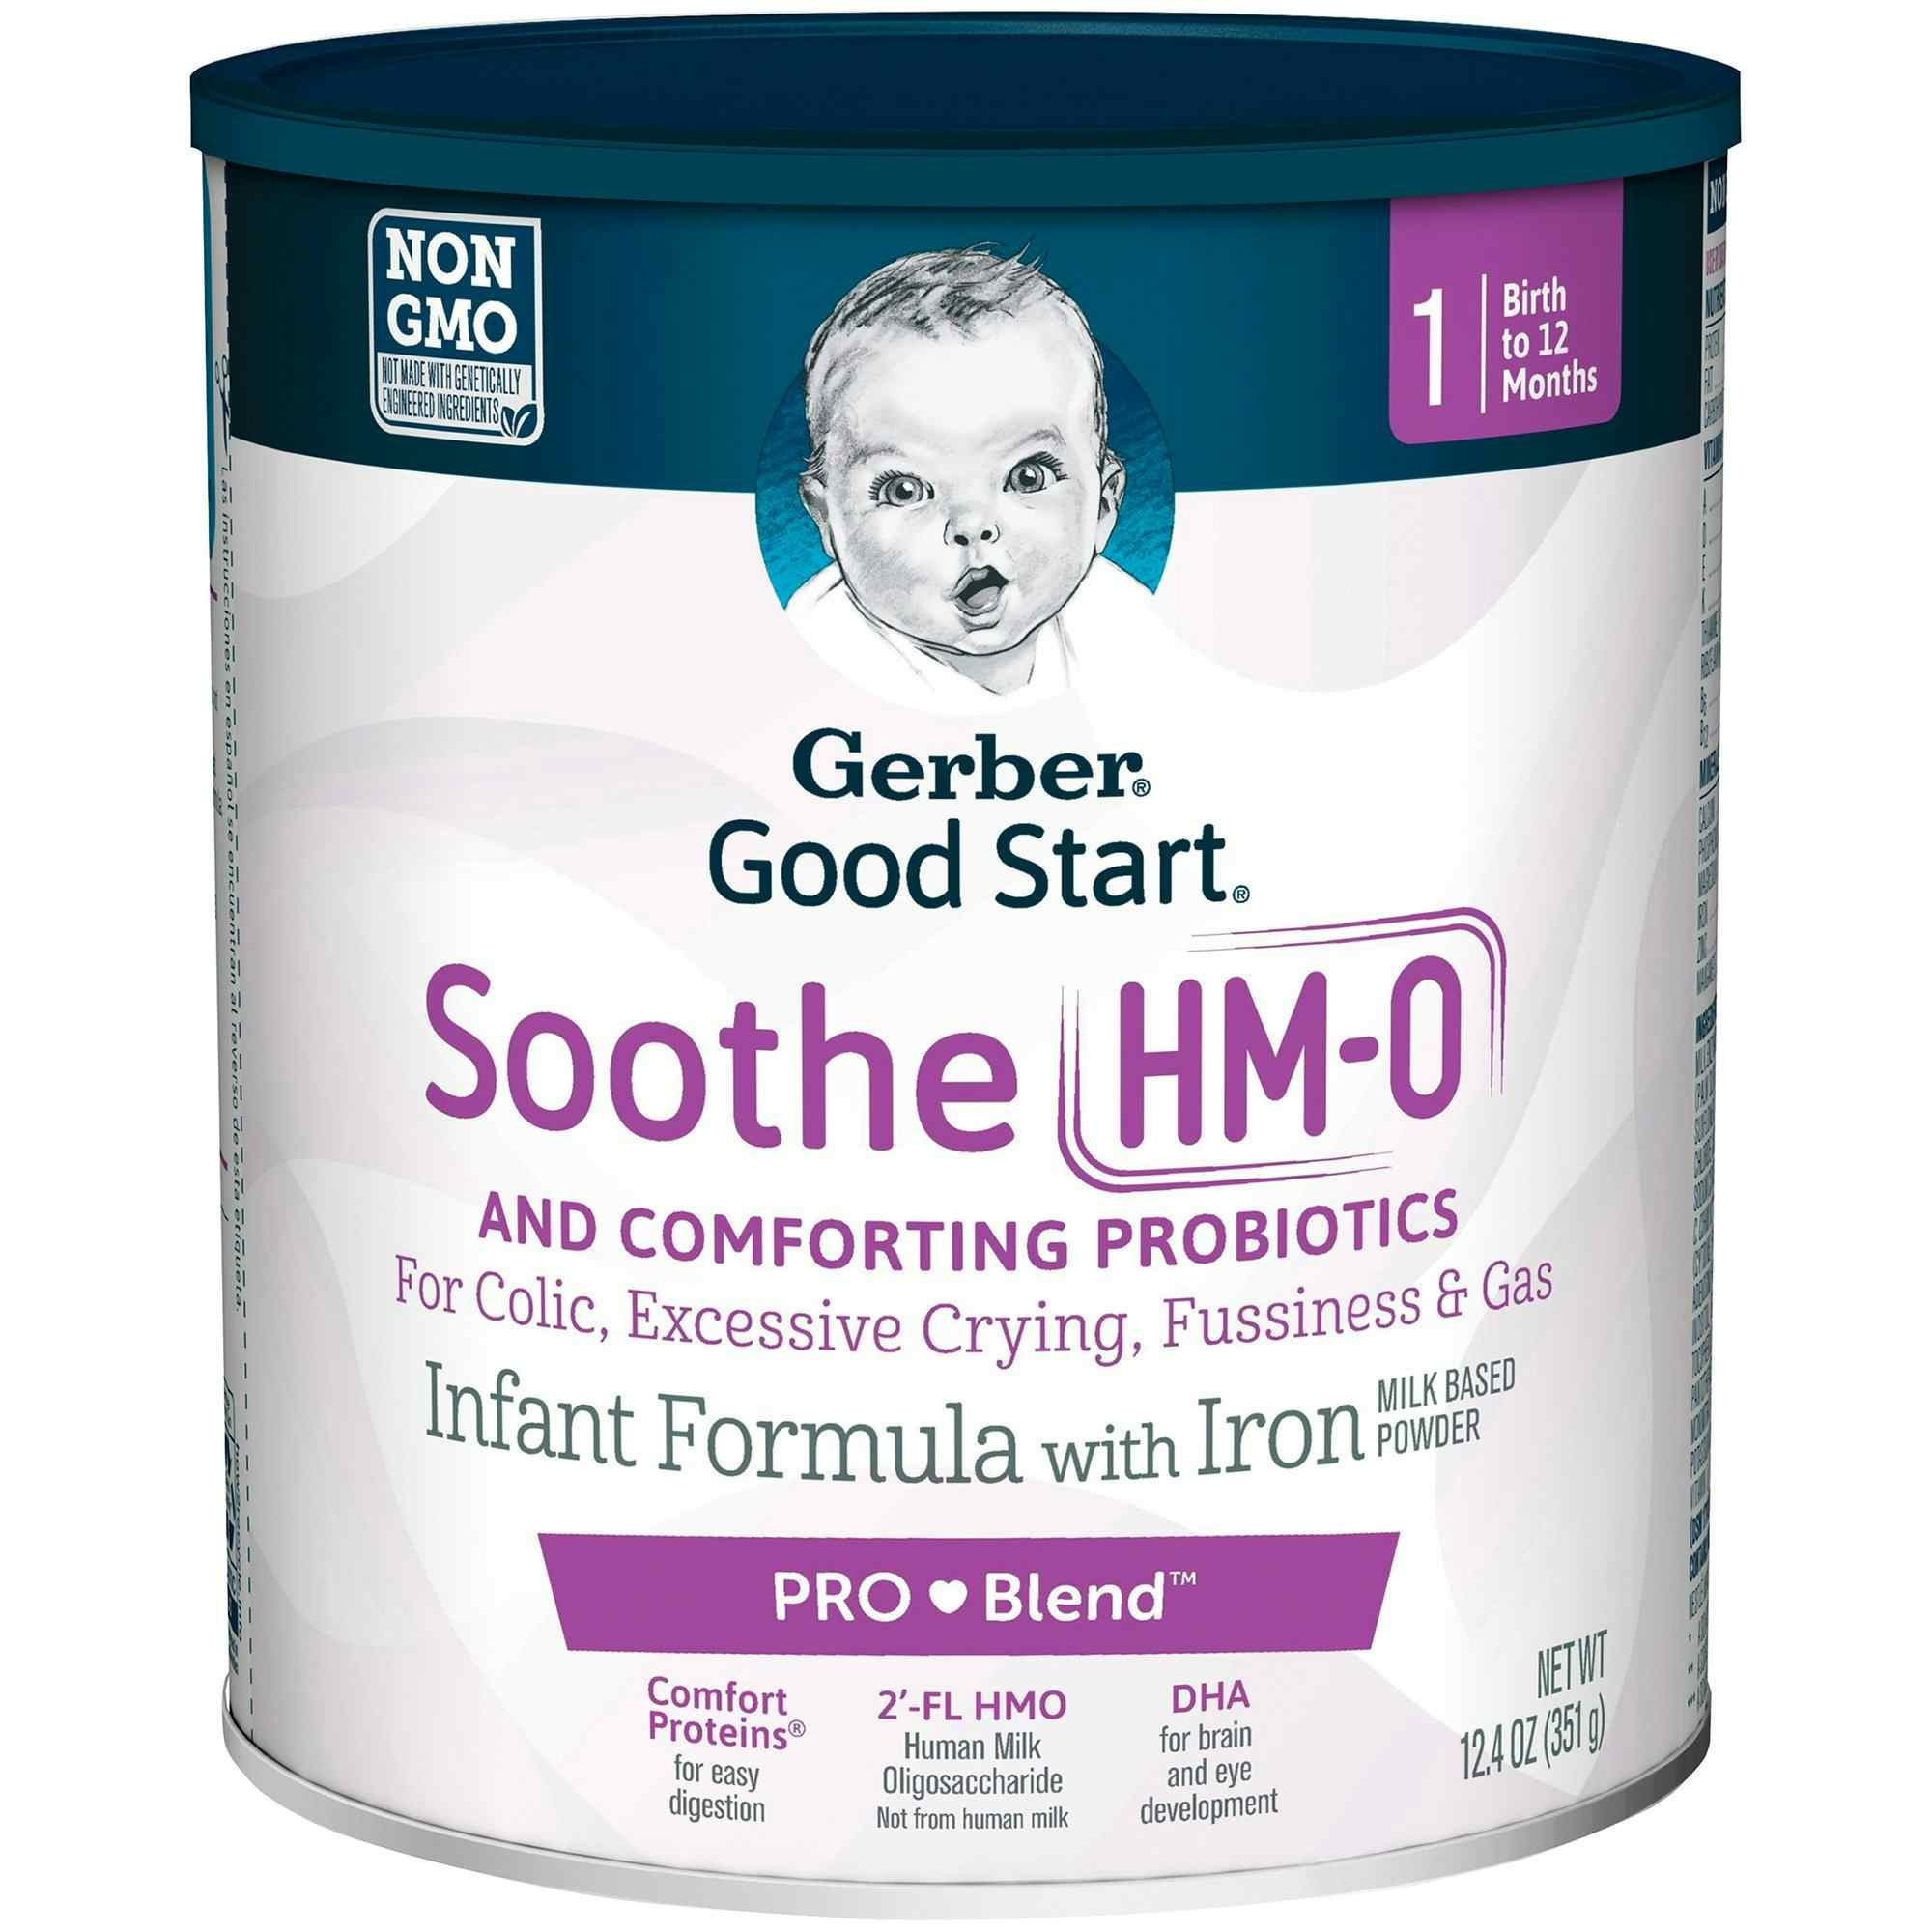 Gerber Good Start Sooth and Comforting Probiotics Infant Formula with Iron, 12.4 oz., 5000062401, Case of 6